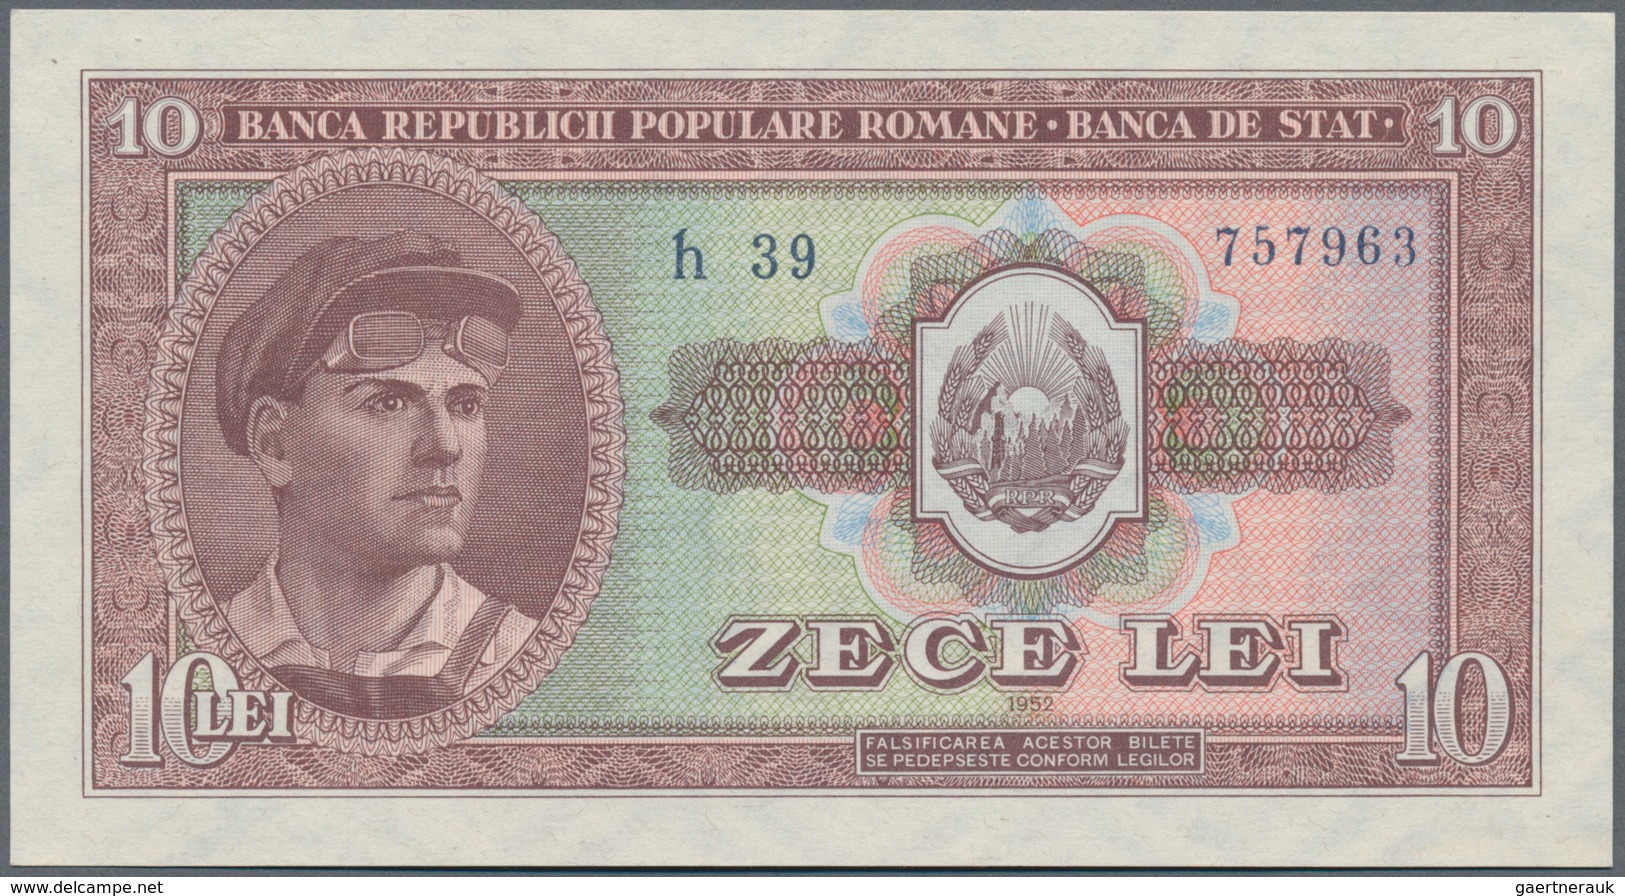 Romania / Rumänien: Very nice lot with 16 Banknotes with 1 - 5 Lei 1952, 20 Lei 1950, 1000 Lei 1948,